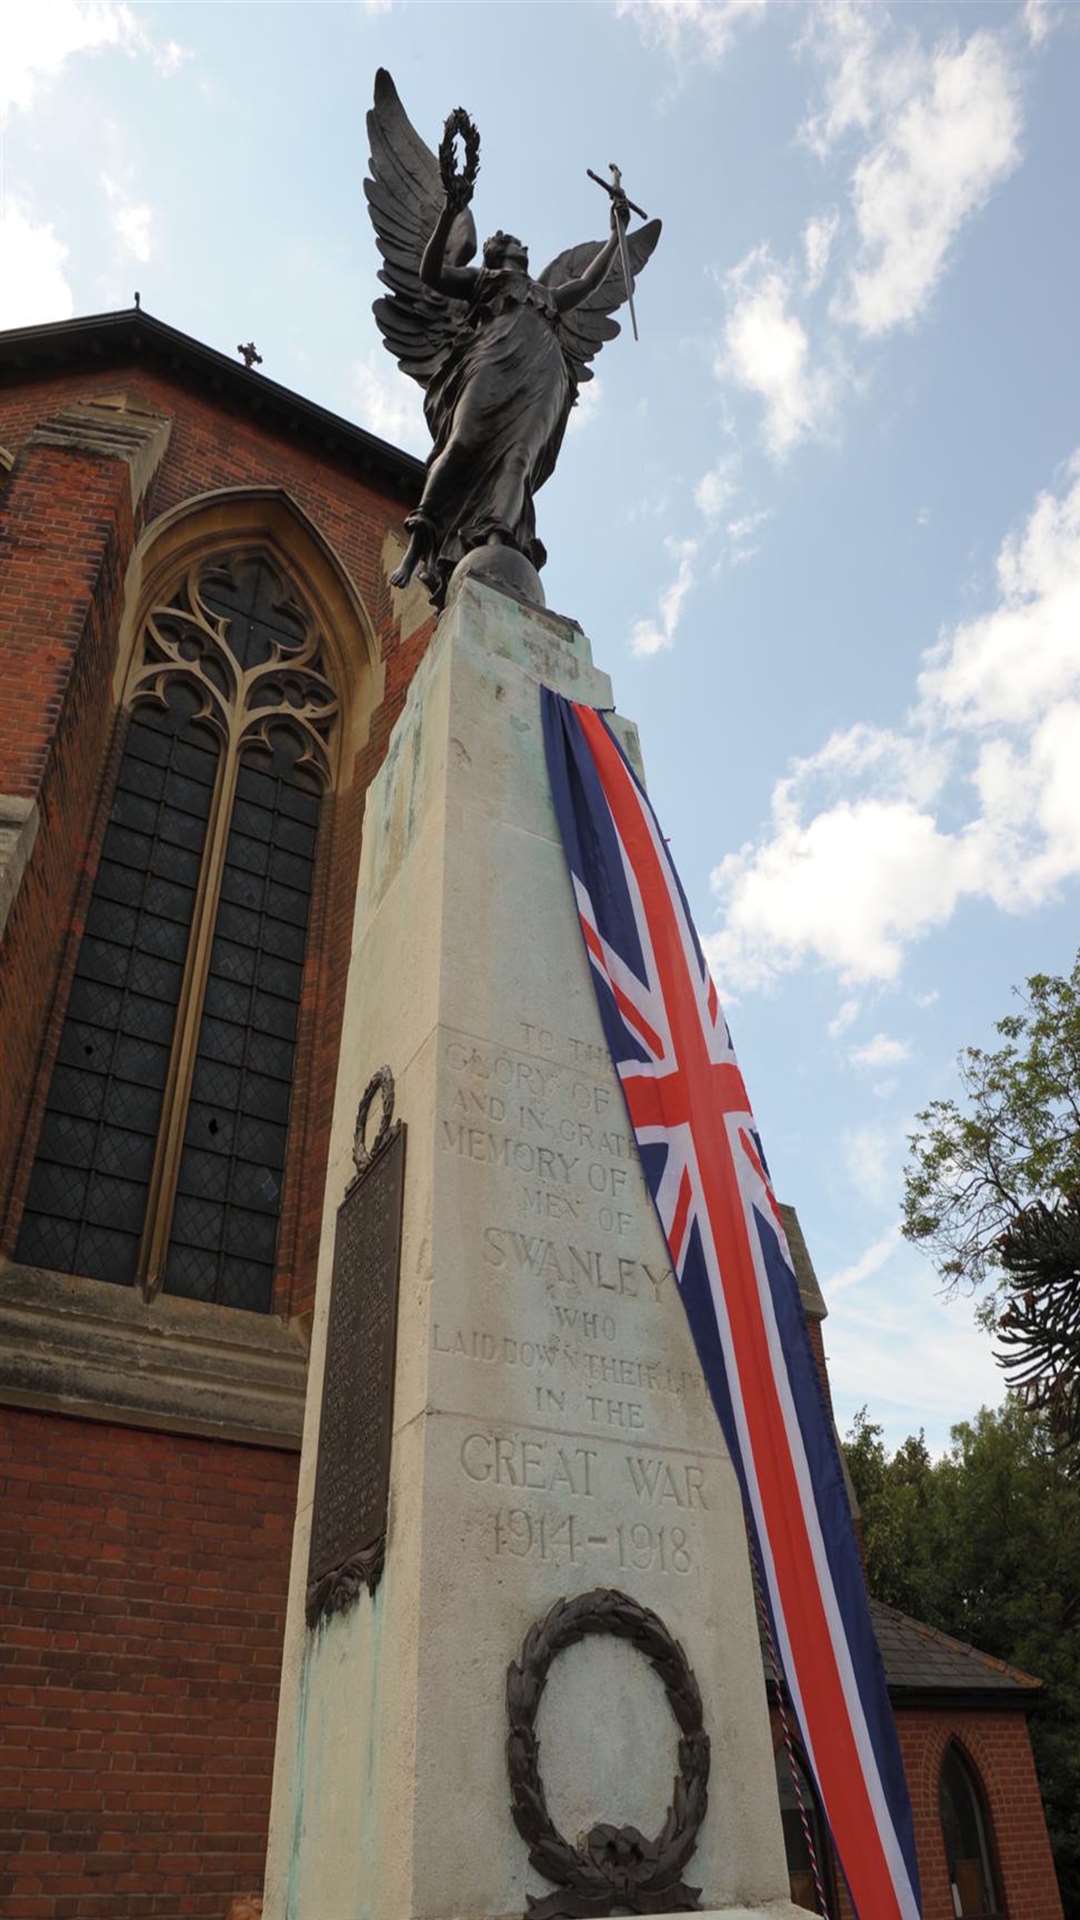 St Mary's Church and the rededication of the war memorial.